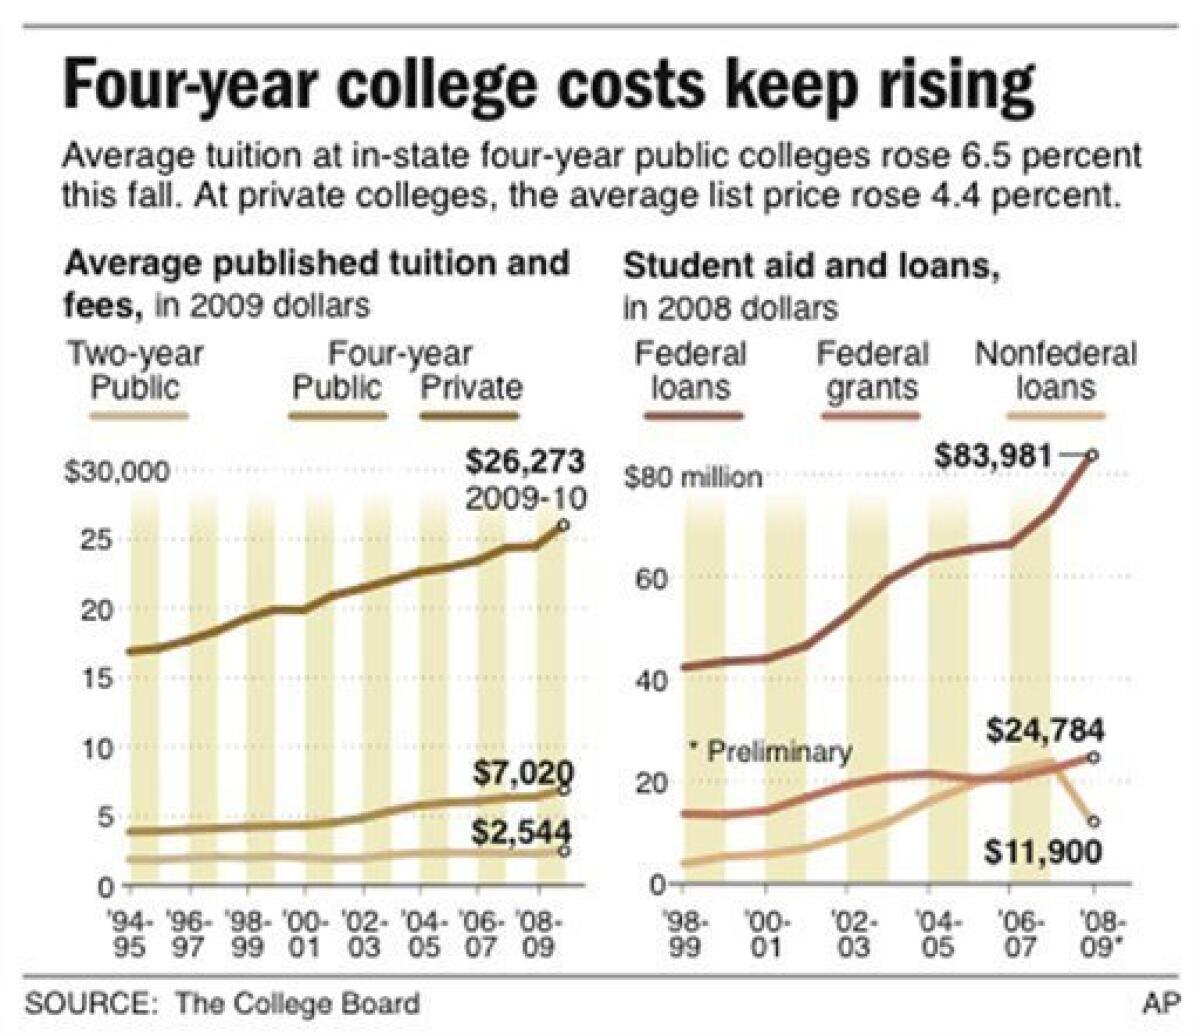 What contributes to rising college costs?